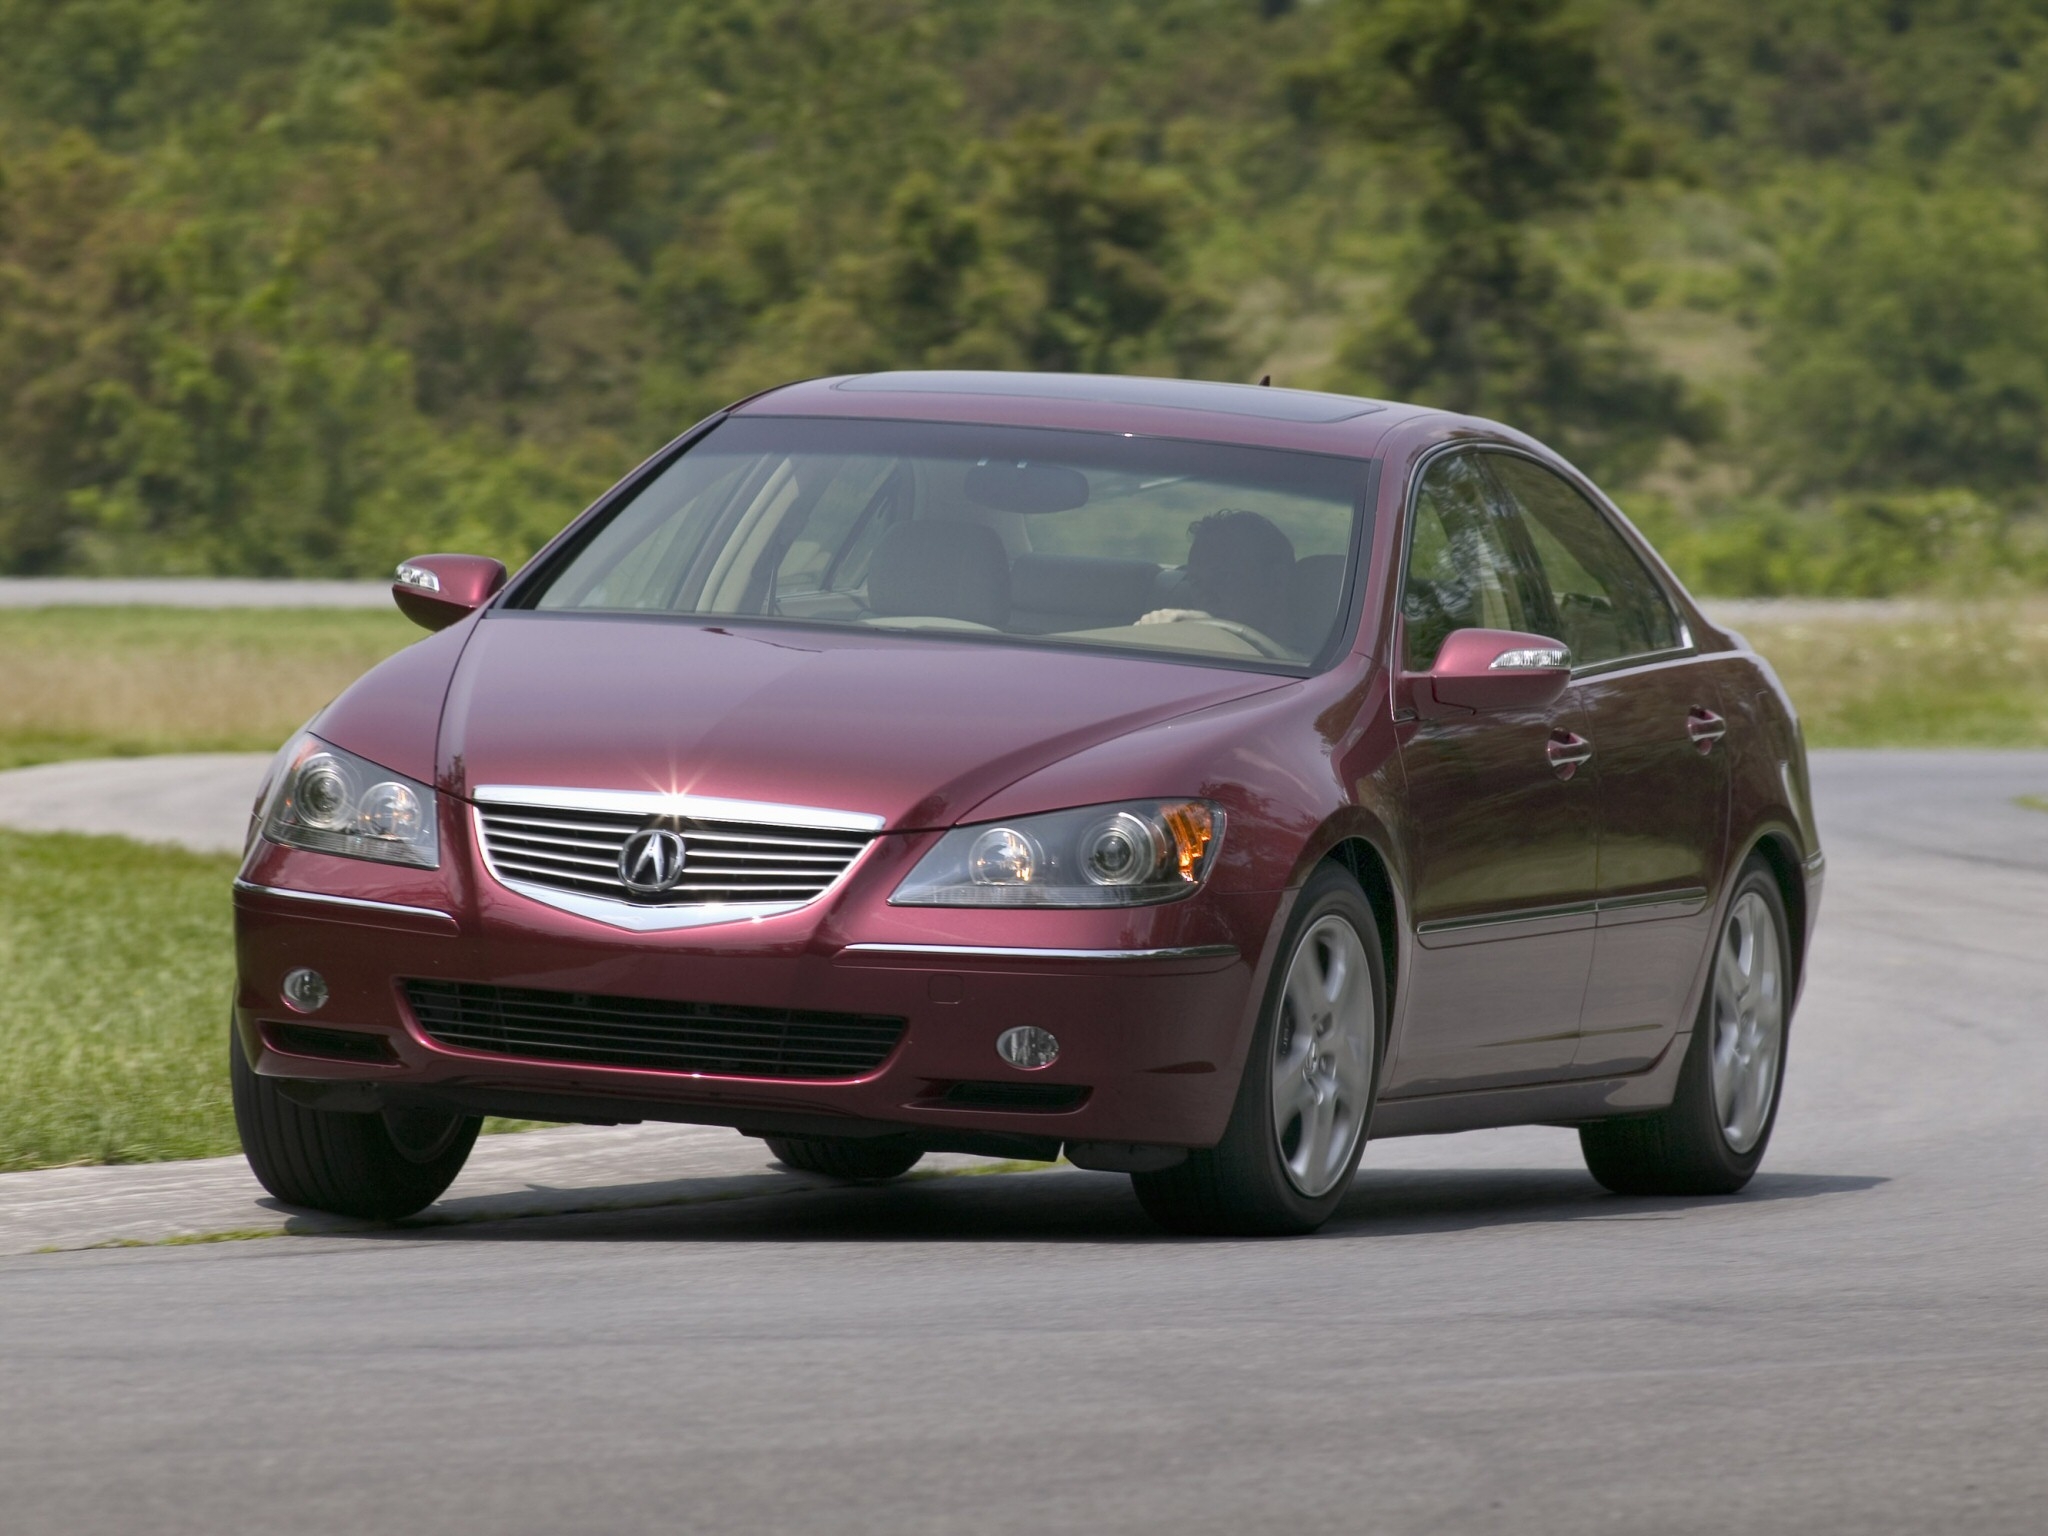 front view, acura, auto, trees, grass, cars, red, turn, style, akura, 2004, track, sedan, route, rl